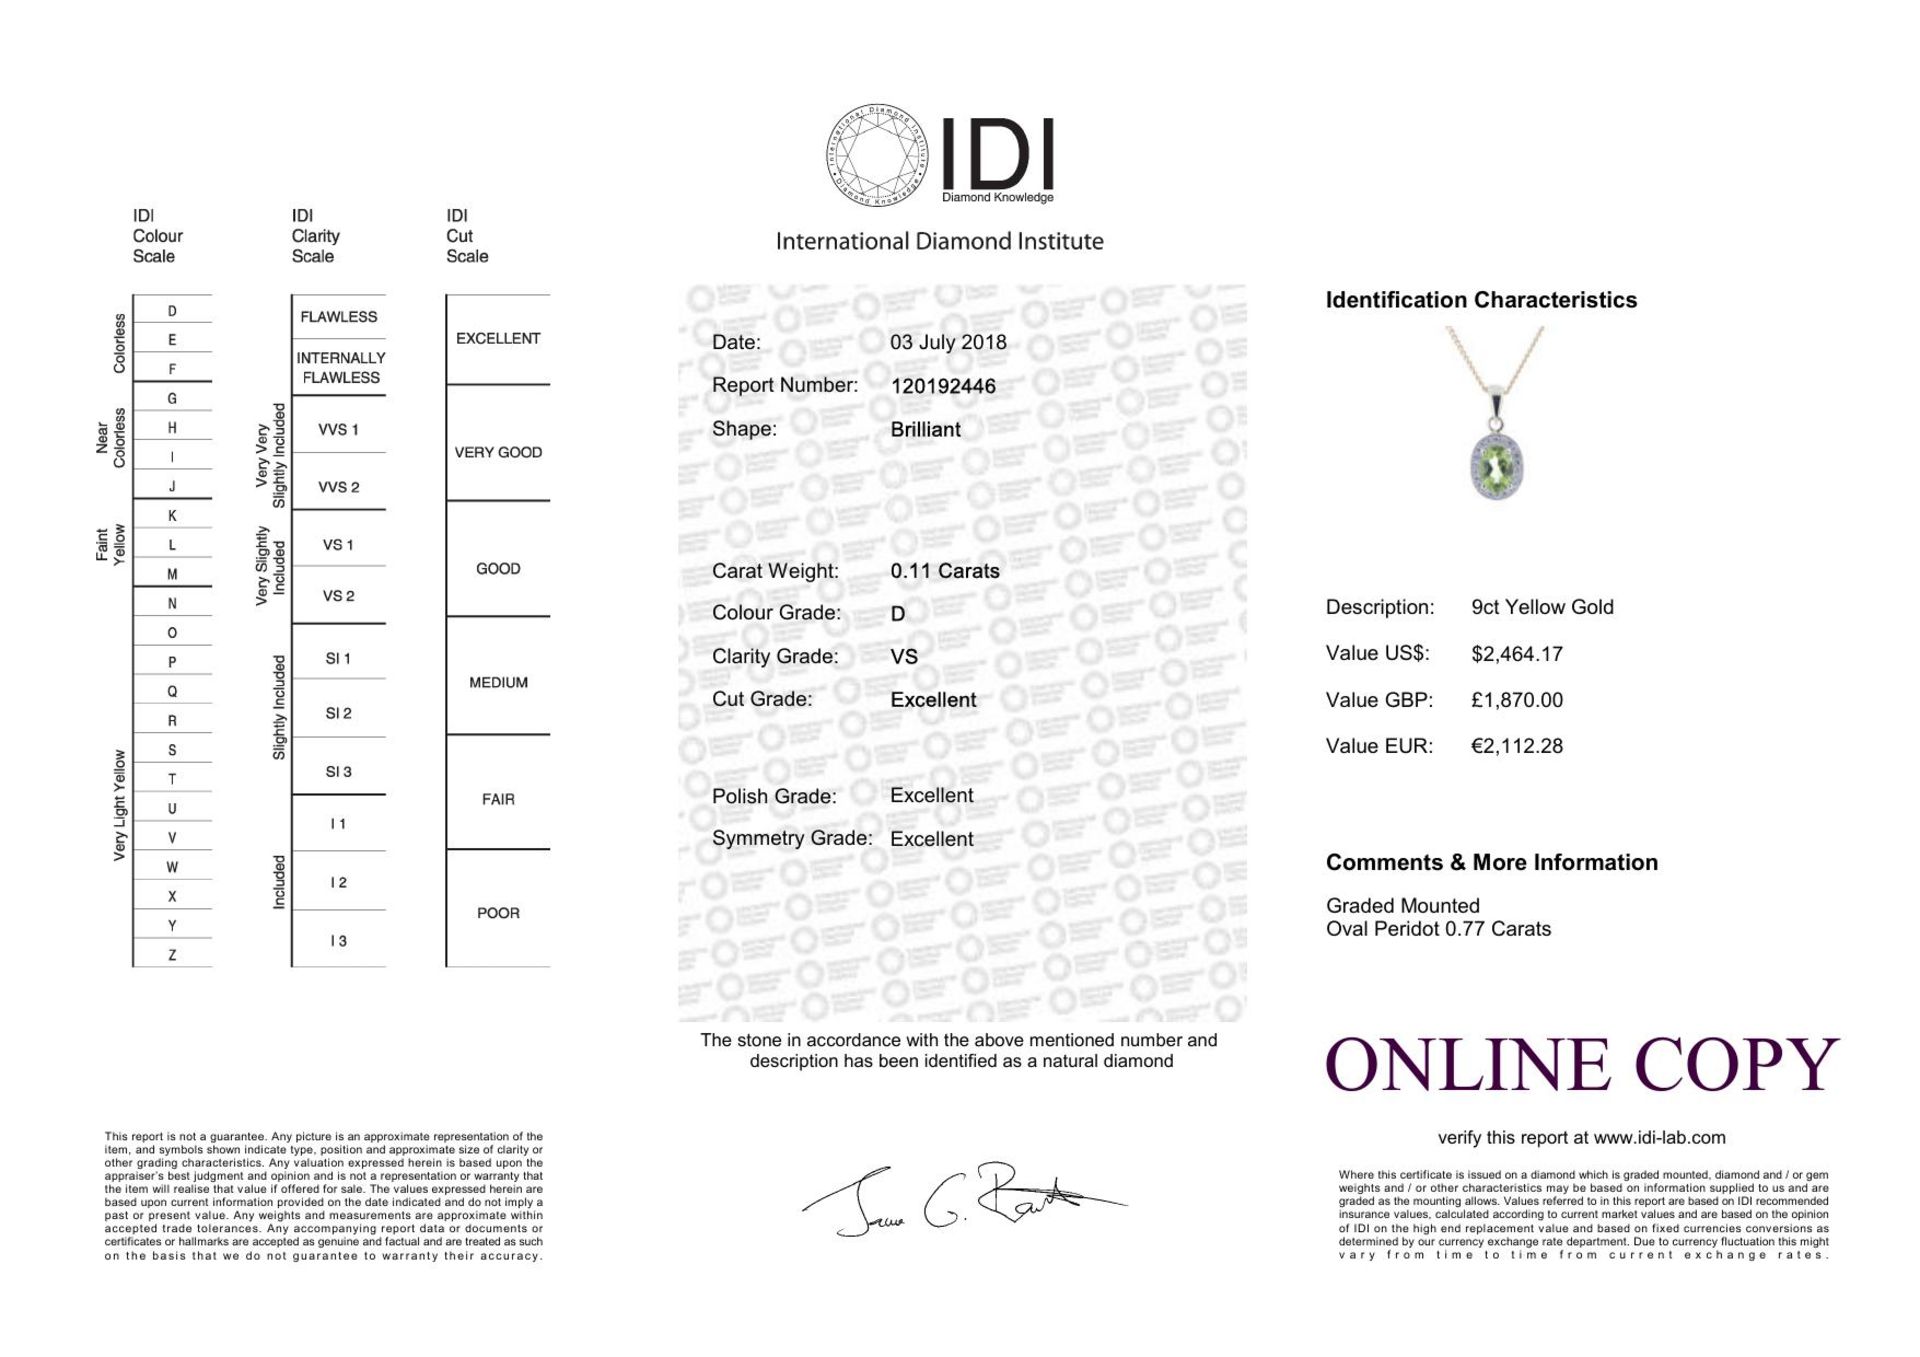 9ct Yellow Gold Diamond And Peridot Pendant (P 0.75) 0.11 Carats - Valued By IDI £1,870.00 - An oval - Image 4 of 4